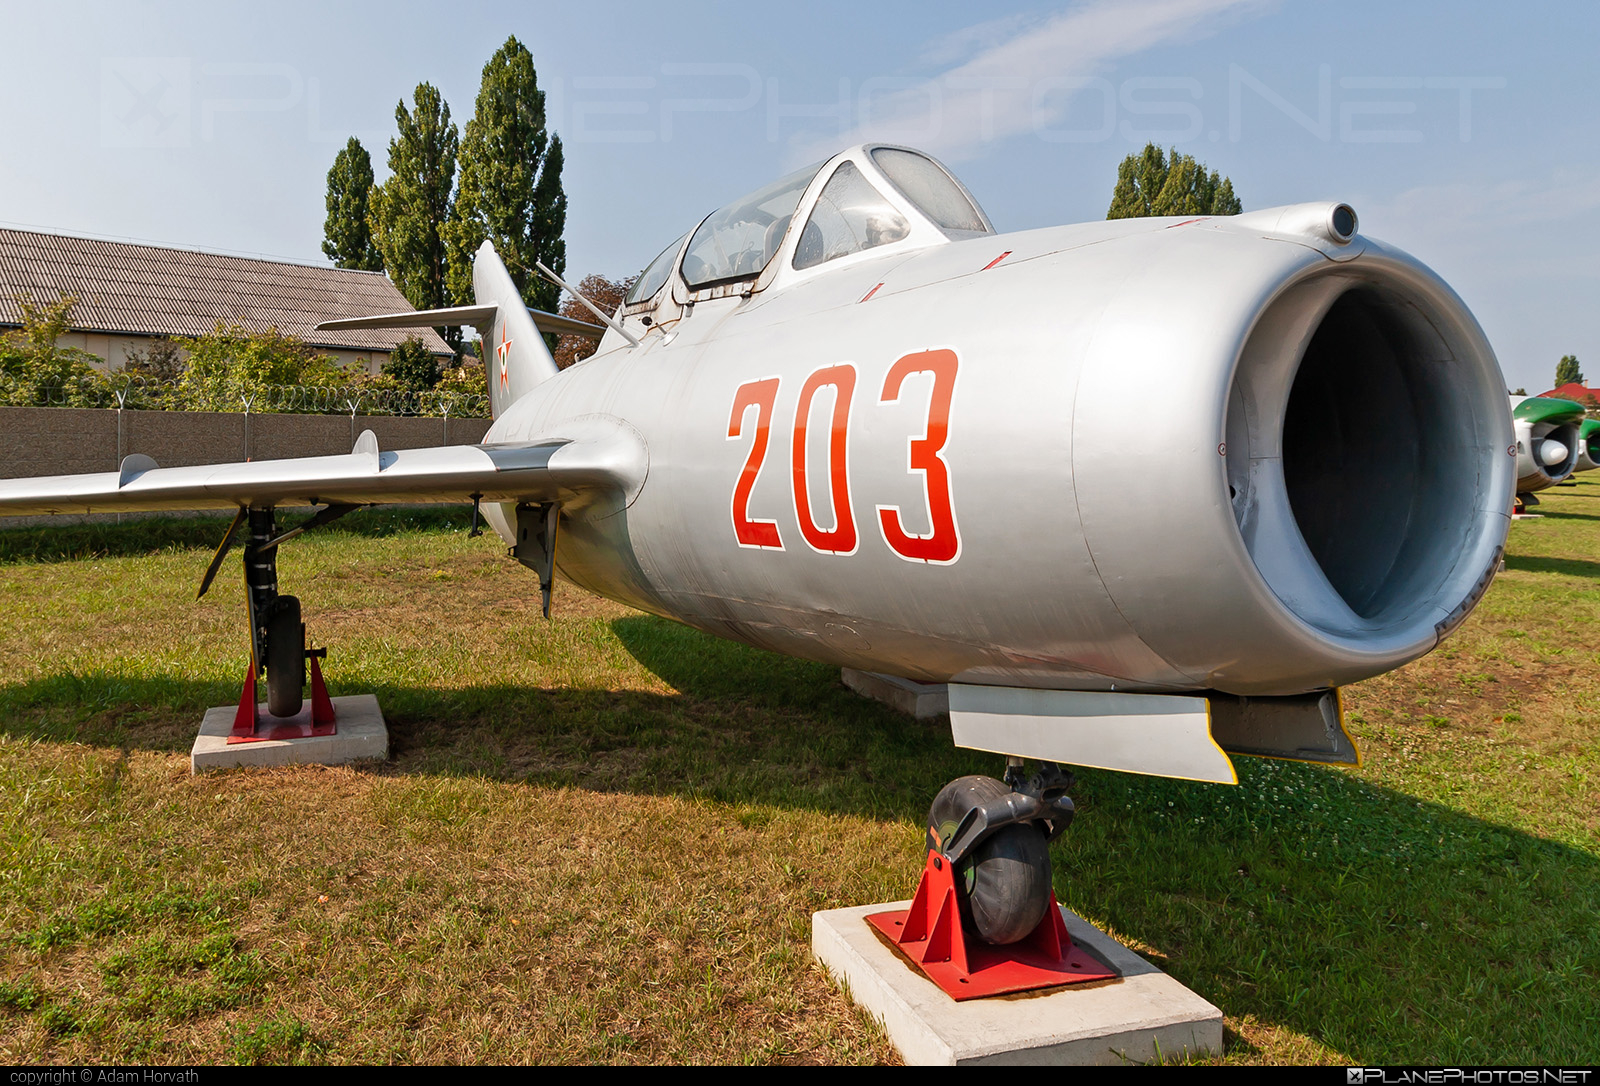 Mikoyan-Gurevich MiG-15UTI - 203 operated by Magyar Néphadsereg (Hungarian People's Army) #hungarianpeoplesarmy #magyarnephadsereg #mig #mig15 #mig15uti #mikoyangurevich